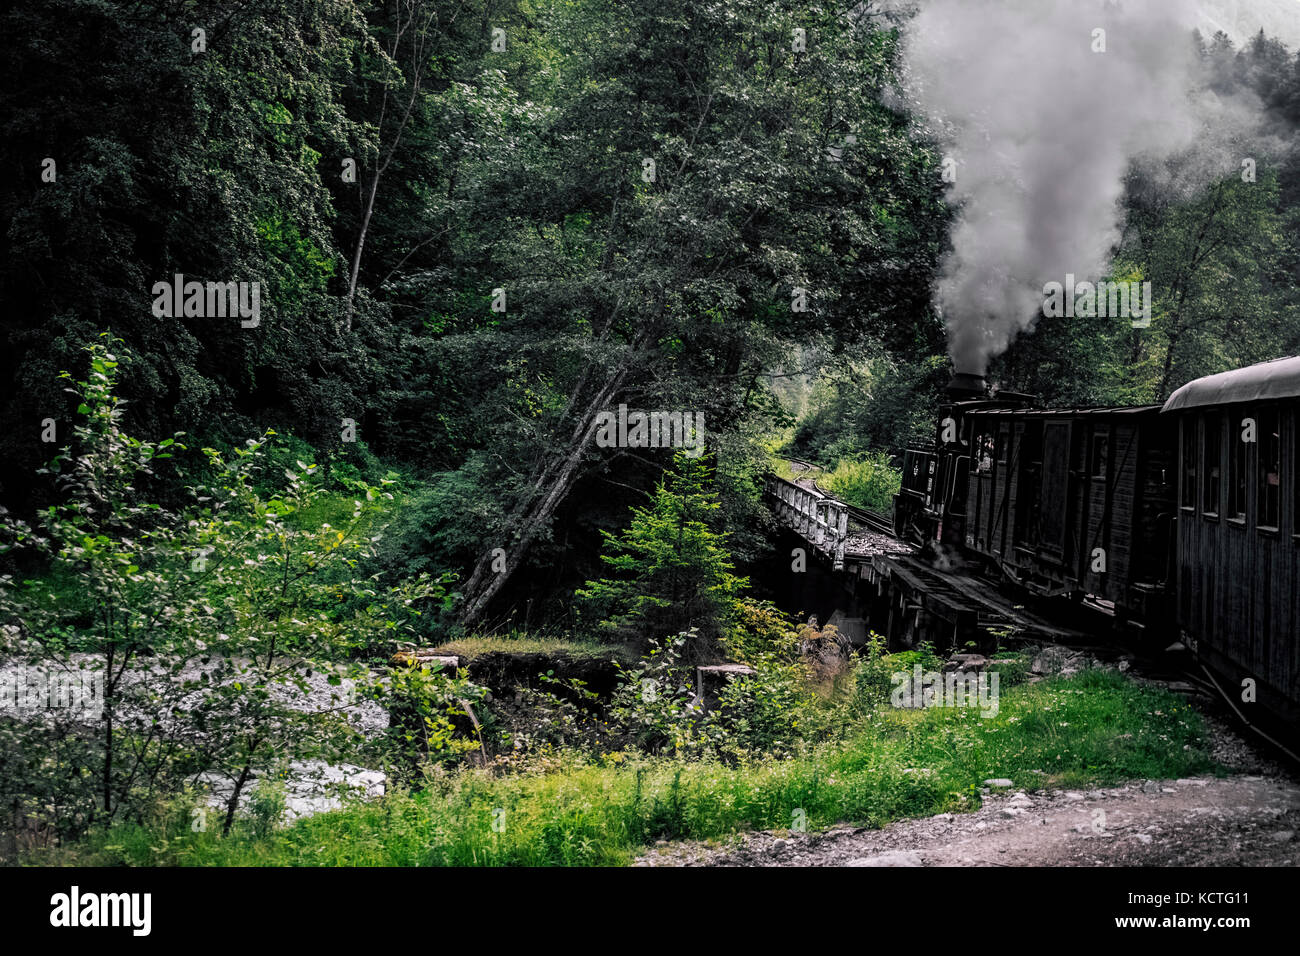 Scenic View Of Steam Locomotive Crossing Bridge Through Lush Green Forest With Diminishing Perspective Of Railway Stock Photo